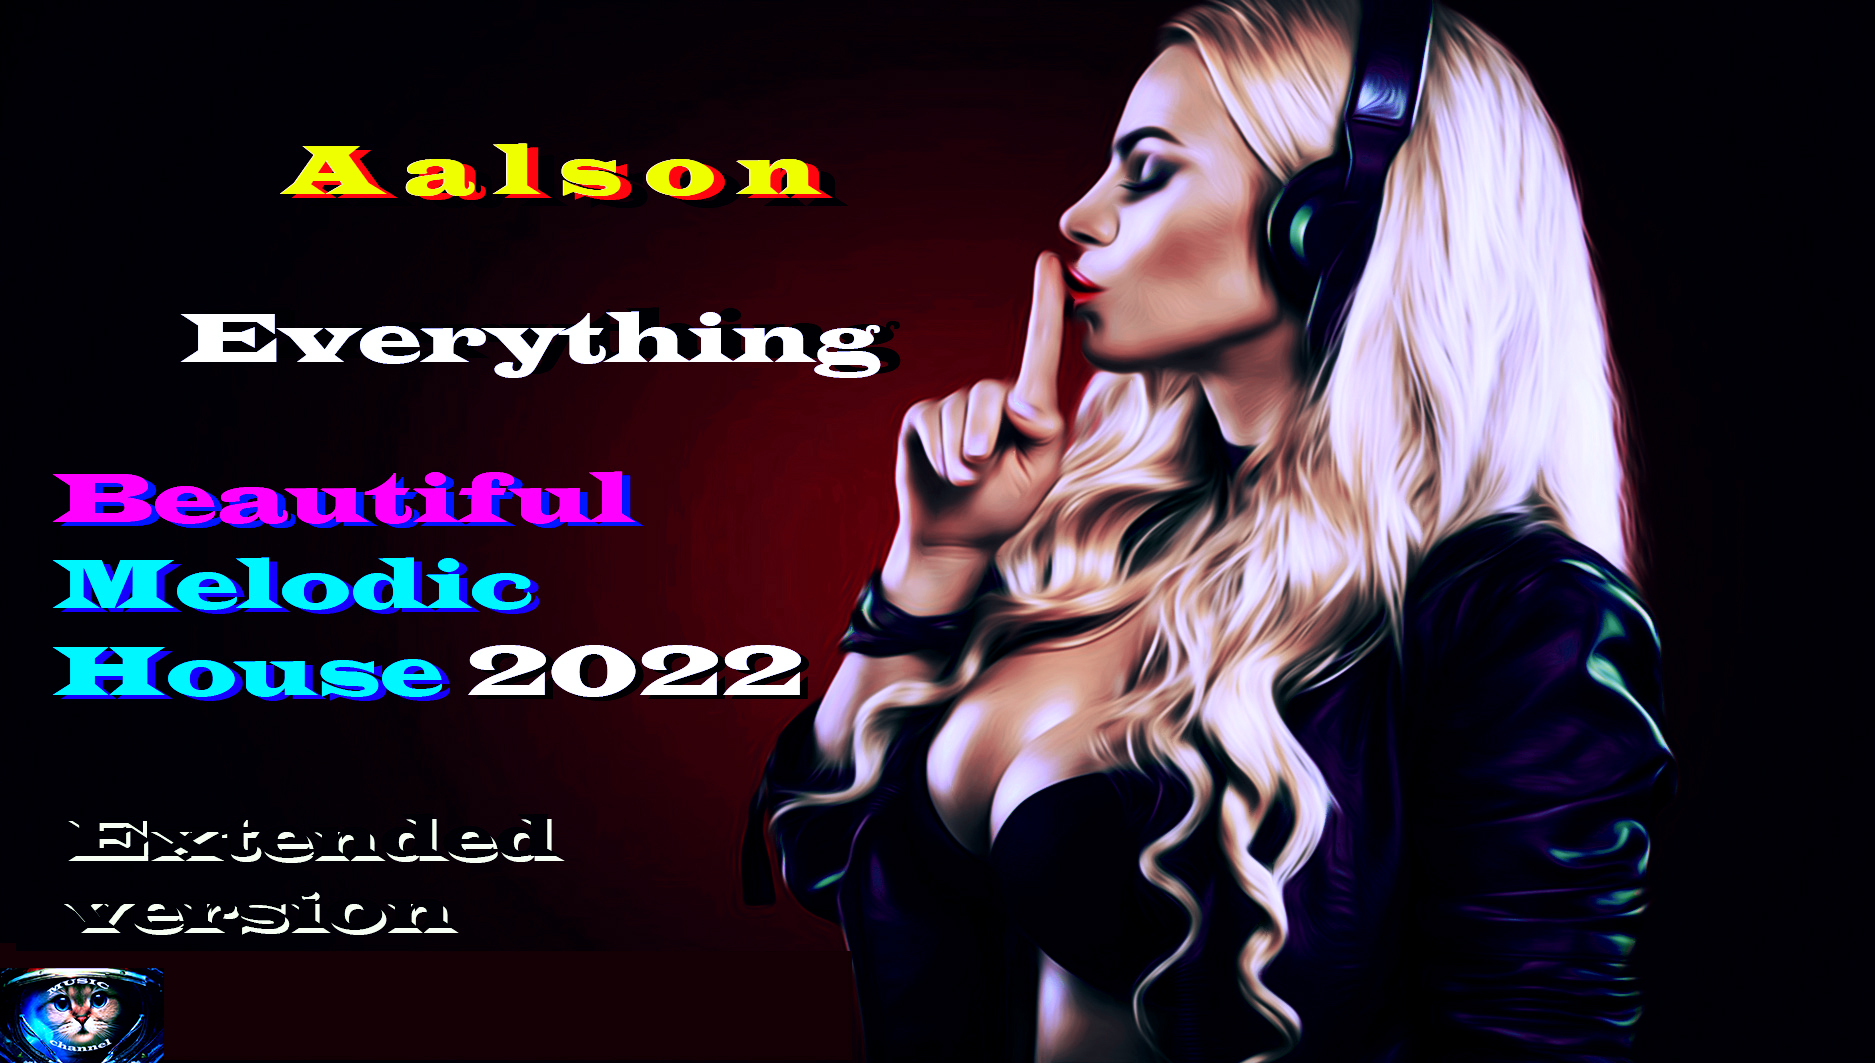 Aalson - Everything (Beautiful Melodic House 2022,Extended Version) Красивый Мелодик Хаус 2022,.mp4